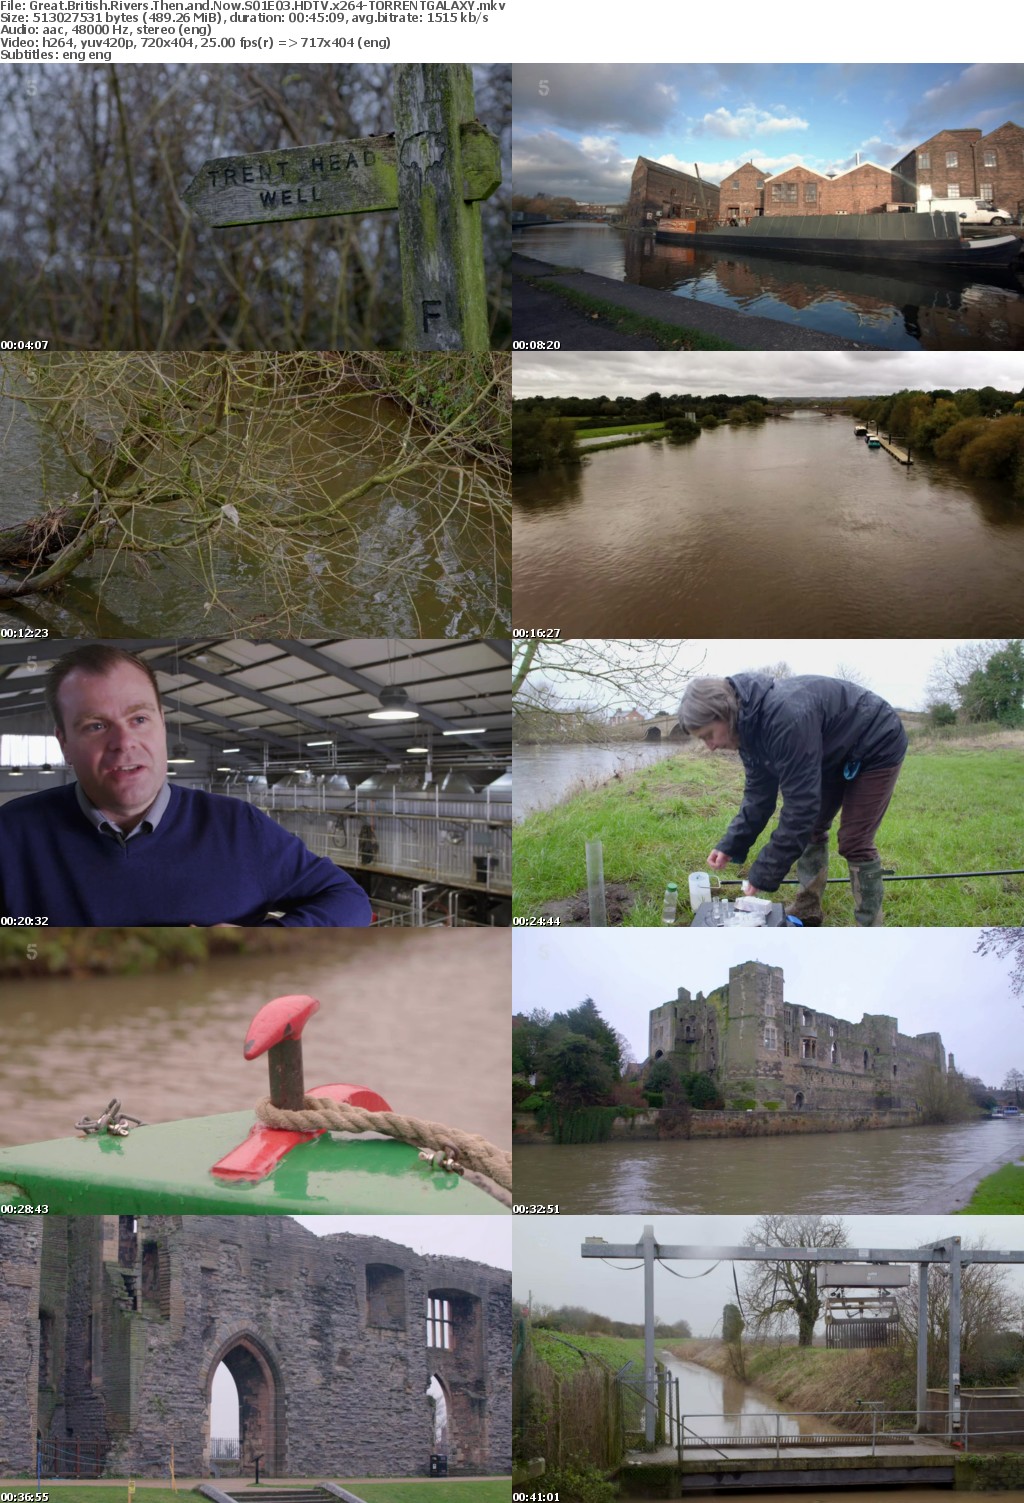 Great British Rivers Then and Now S01E03 HDTV x264-GALAXY